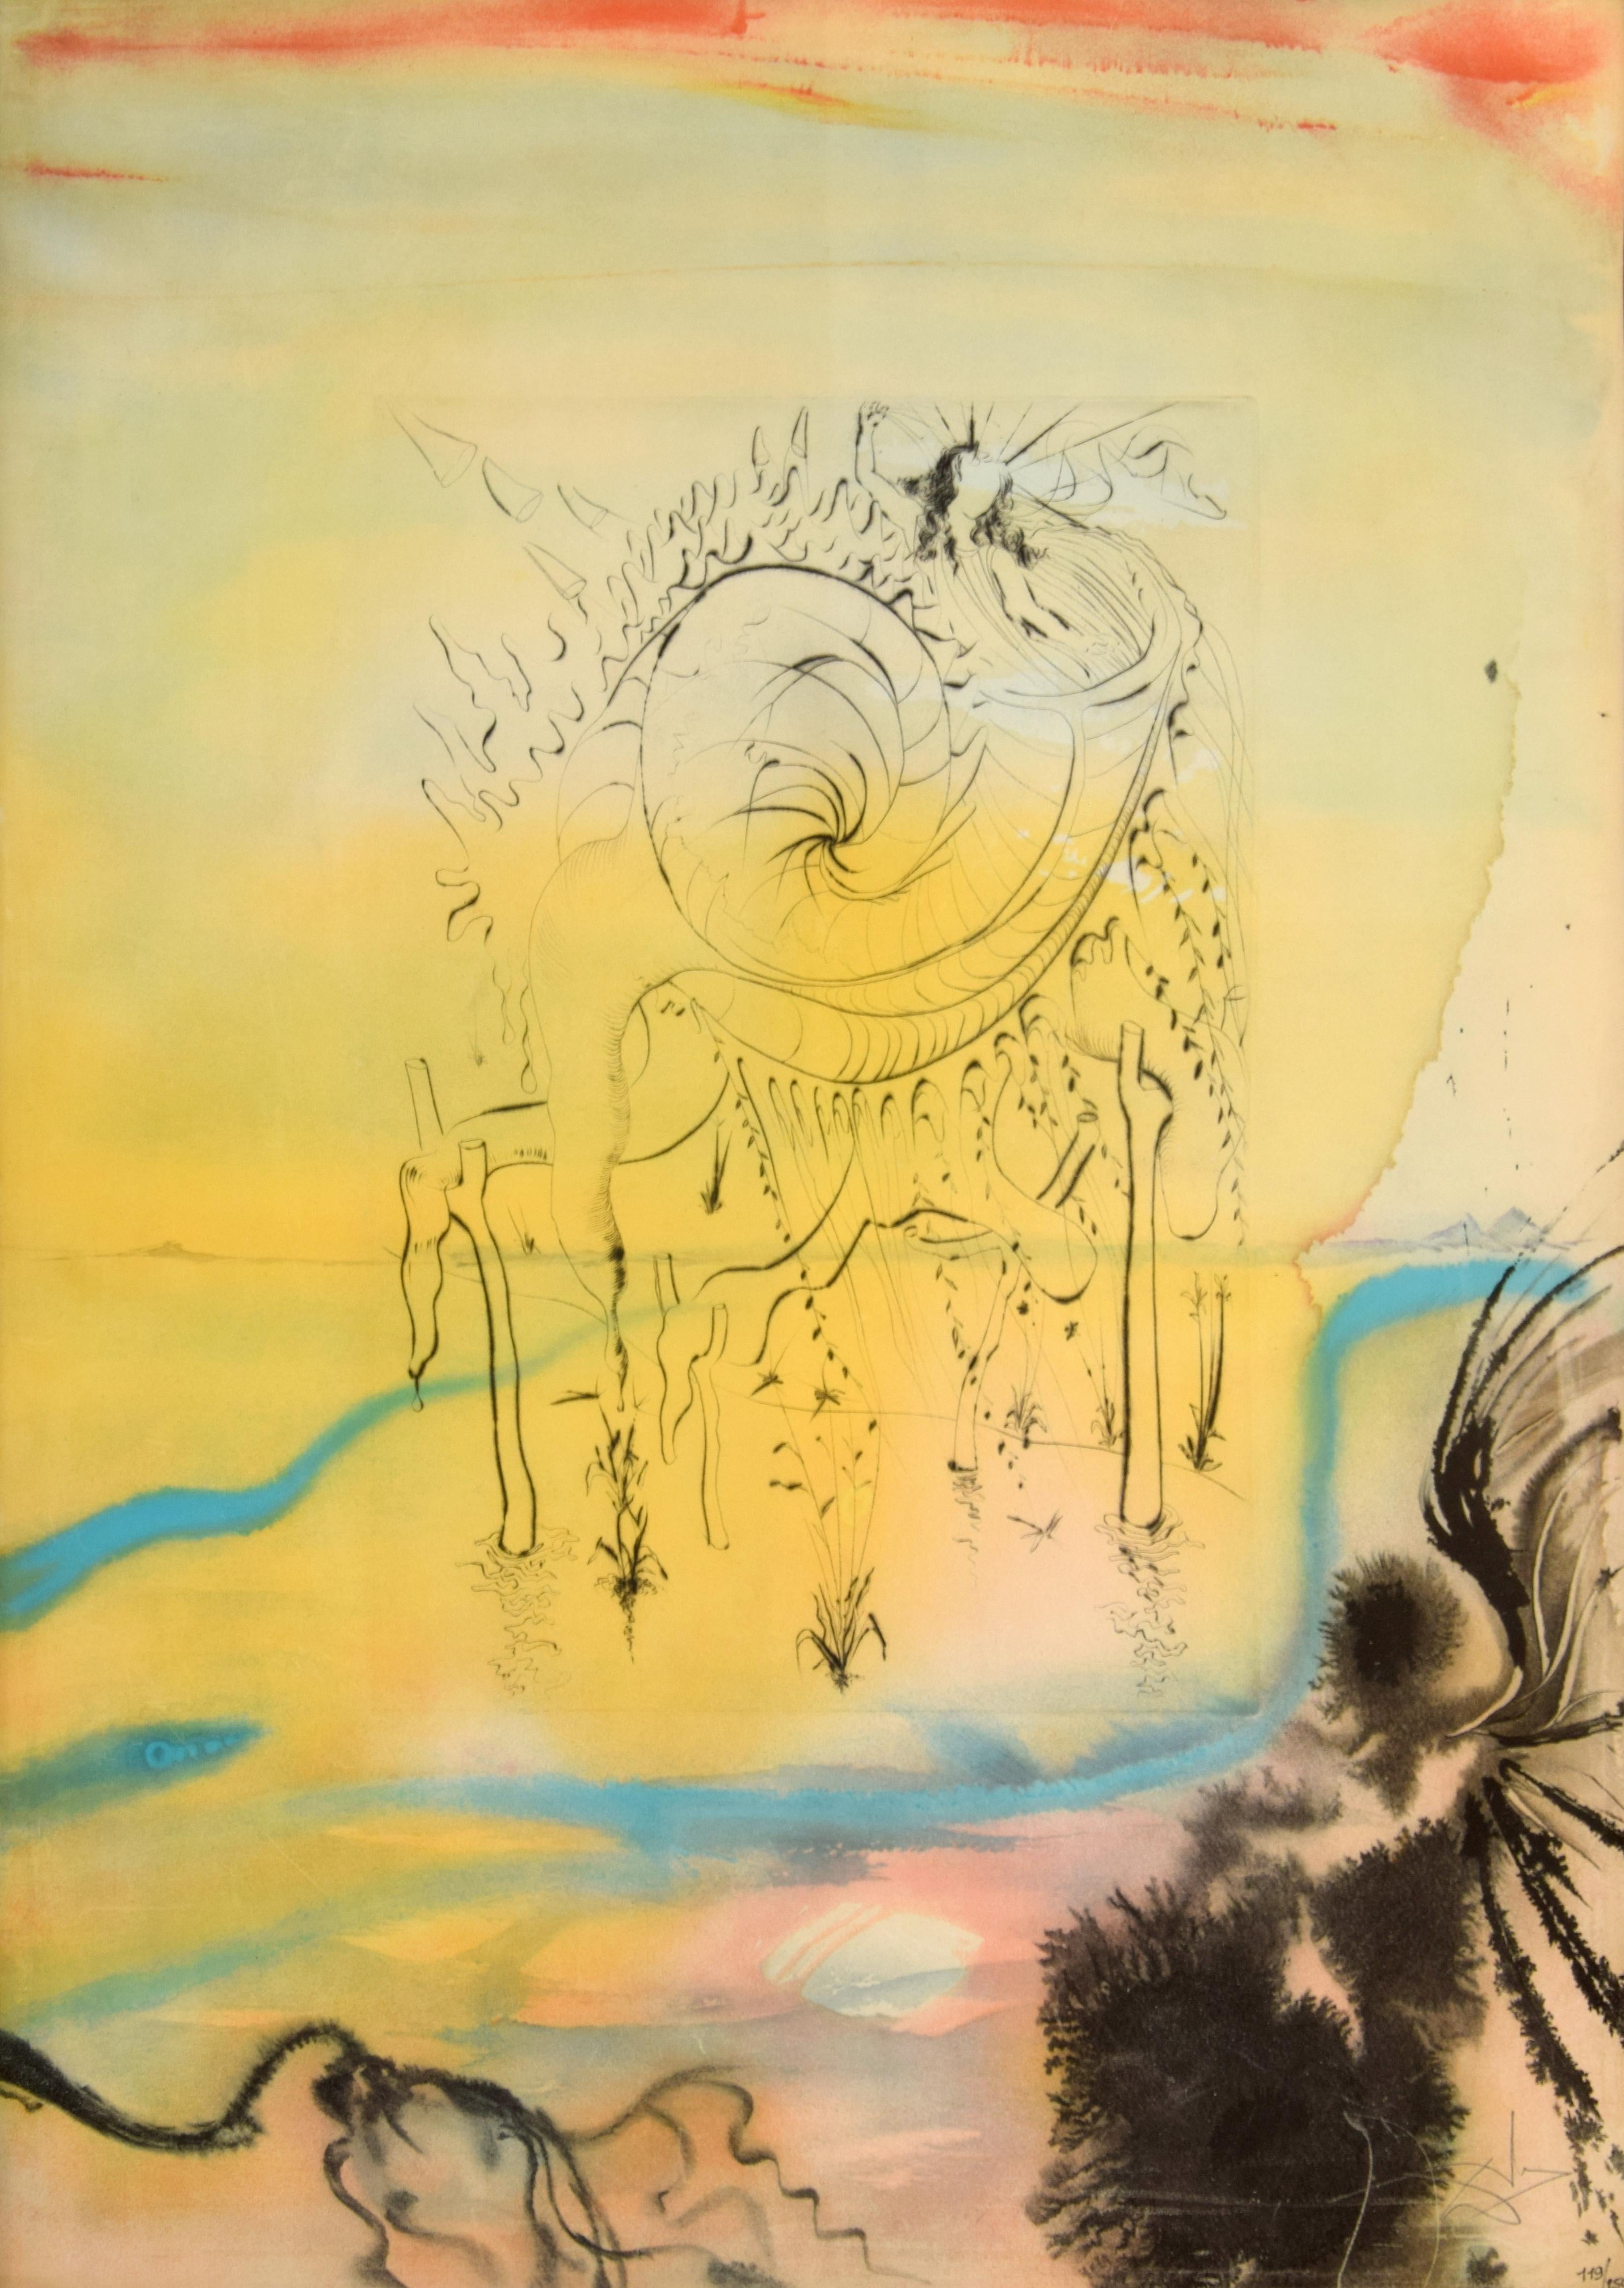 Salvador Dalí Print - Salvador Dali “Moses Saved from the Waters” Lithograph, Signed Edition